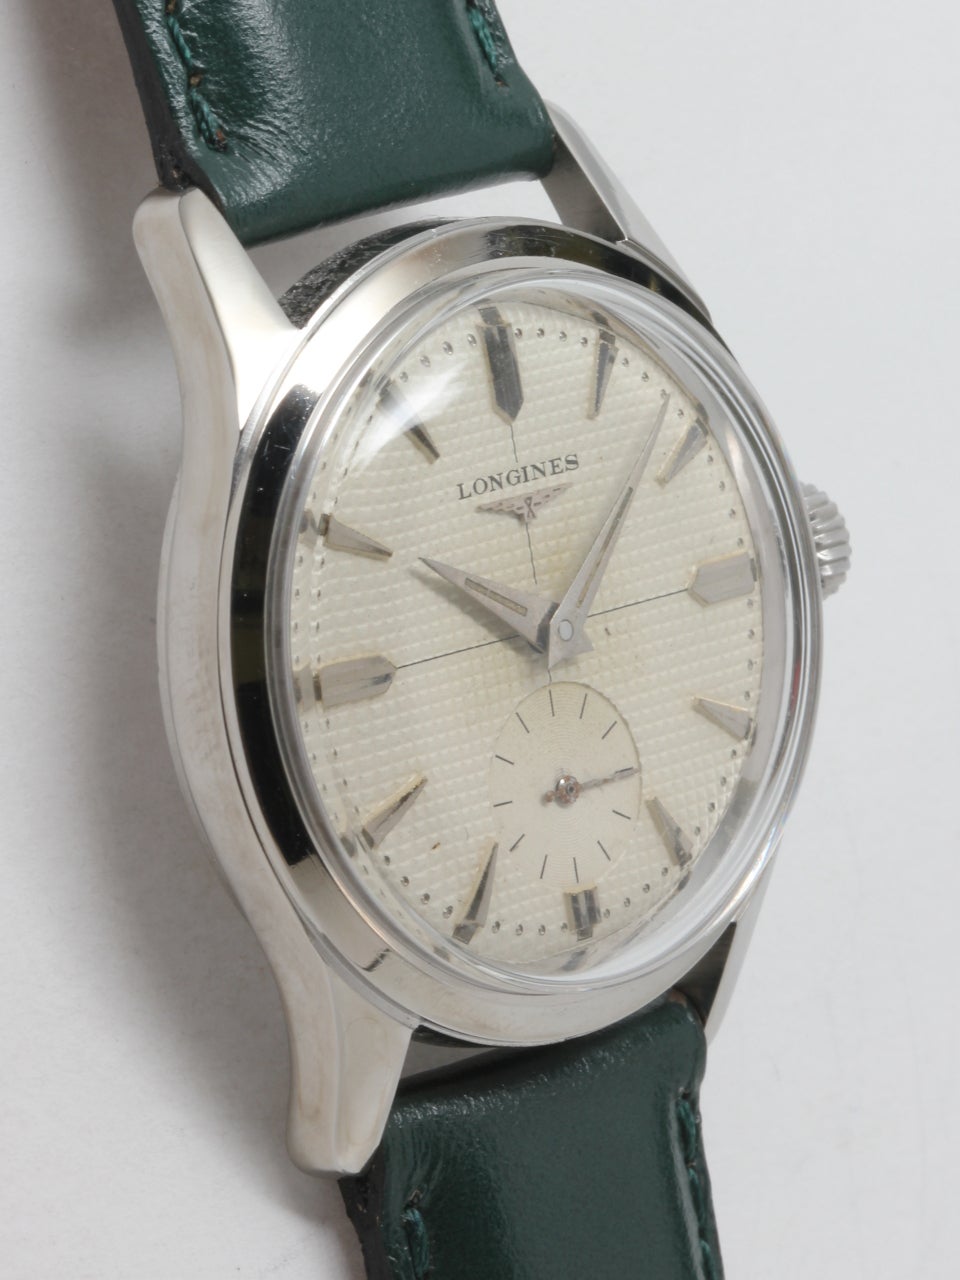 Longines Stainless Steel Wristwatch, circa 1950s. 28 x 34mm case with screw back and extended lugs. Very pleasing original textured silvered dial with applied indexes and dauphine hands. 17-jewel manual-wind movement with subsidiary seconds.